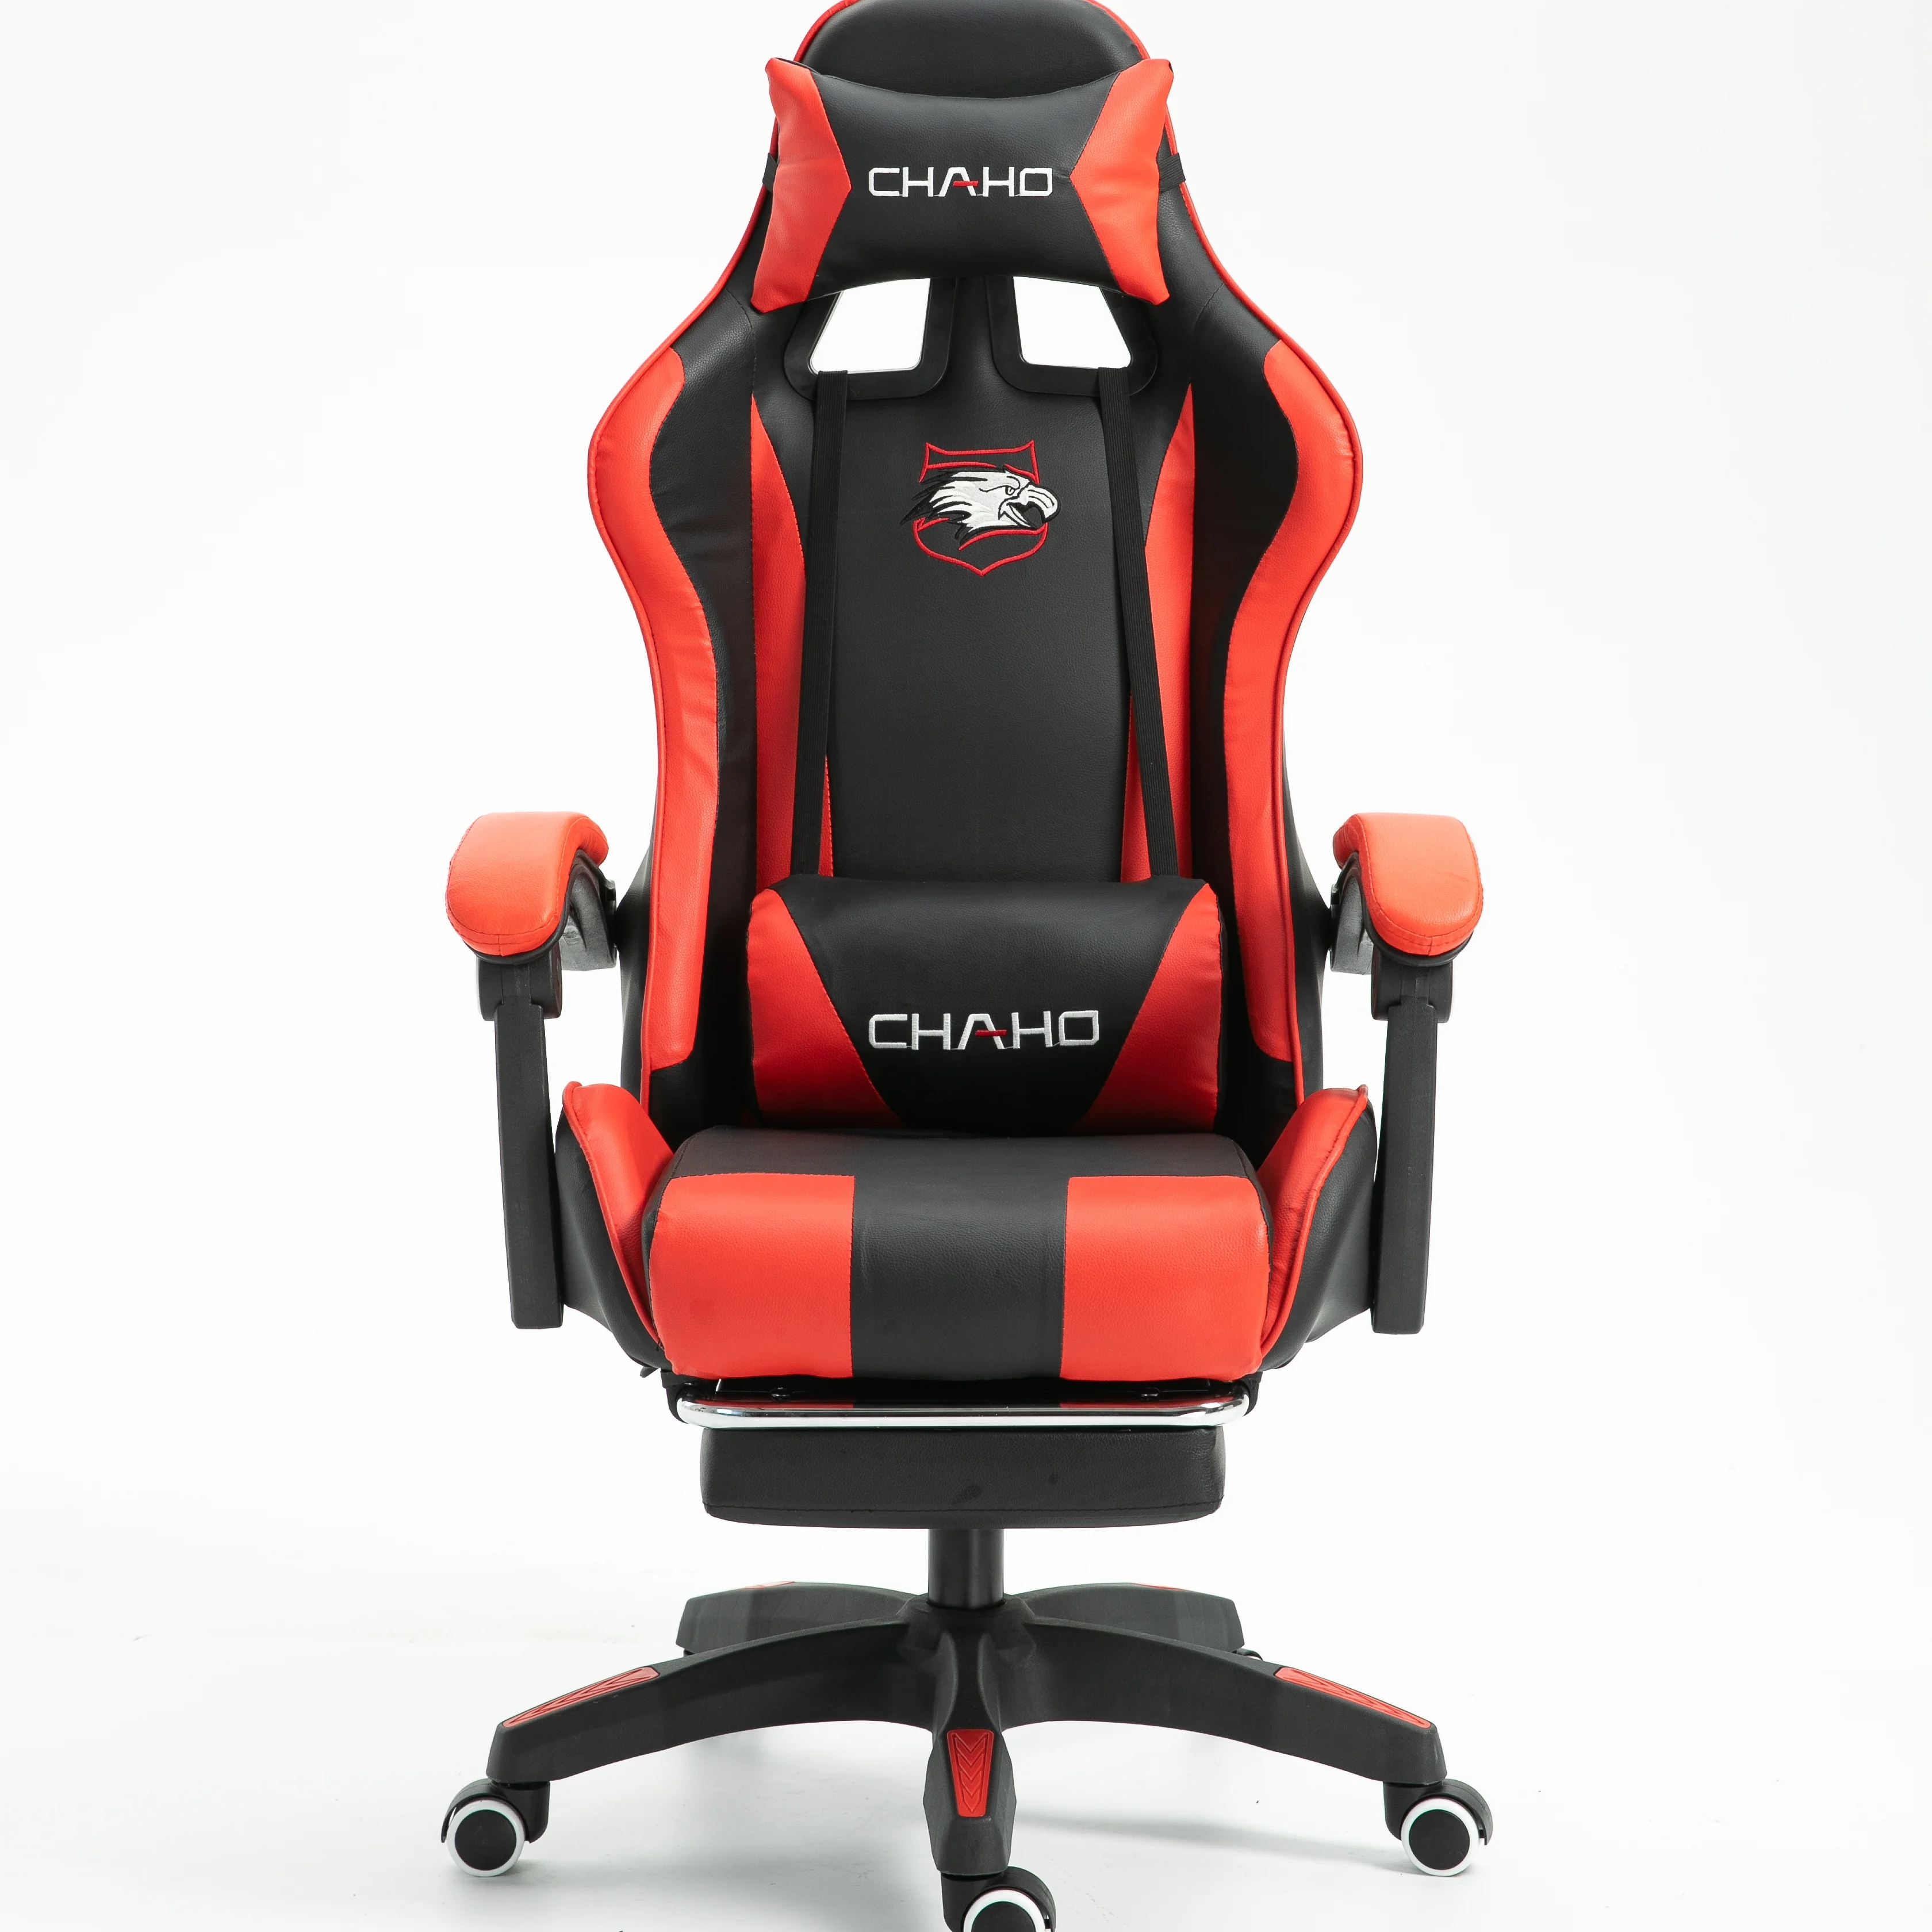 Home Office Comfortable Game Chair Gaming Chair Pc Computer Gaming Chair With Footrest Buy Gaming Chair Gaming Seat Computer Gaming Chair Product On Alibaba Com